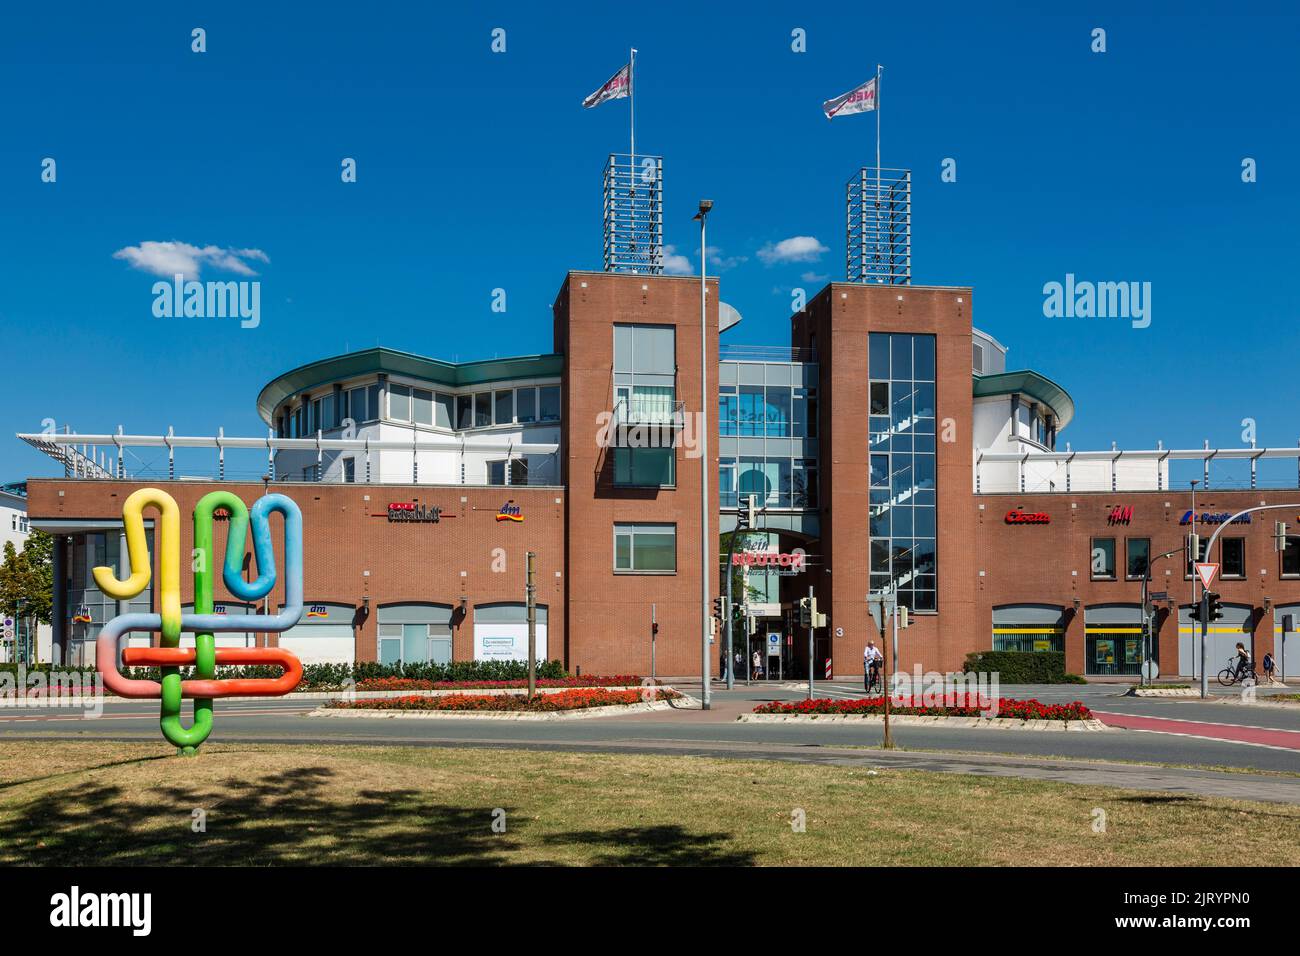 Germany, Bocholt, Lower Rhine, Westmuensterland, Muensterland, Westphalia, North Rhine-Westphalia, NRW, shopping centre Mein Neutor and Neutor Square Stock Photo